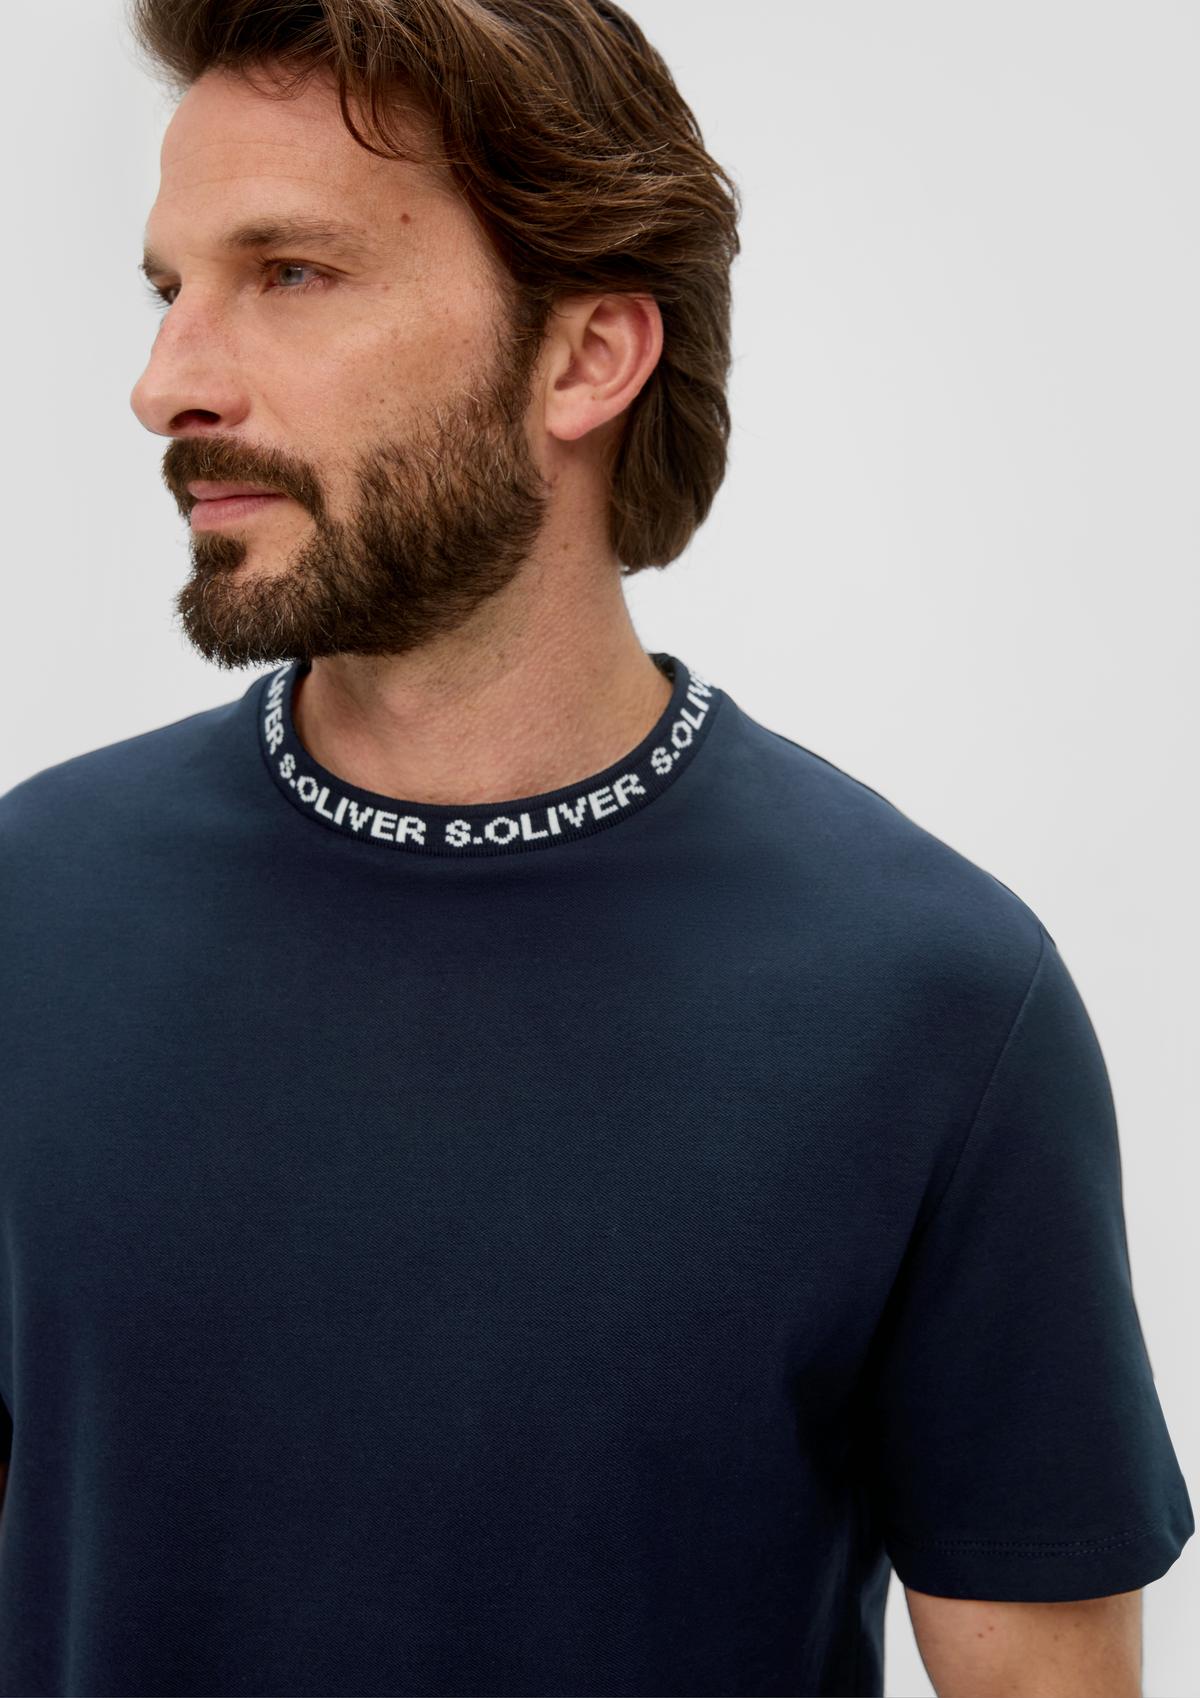 s.Oliver Stretch cotton T-shirt with lettering printed on the collar